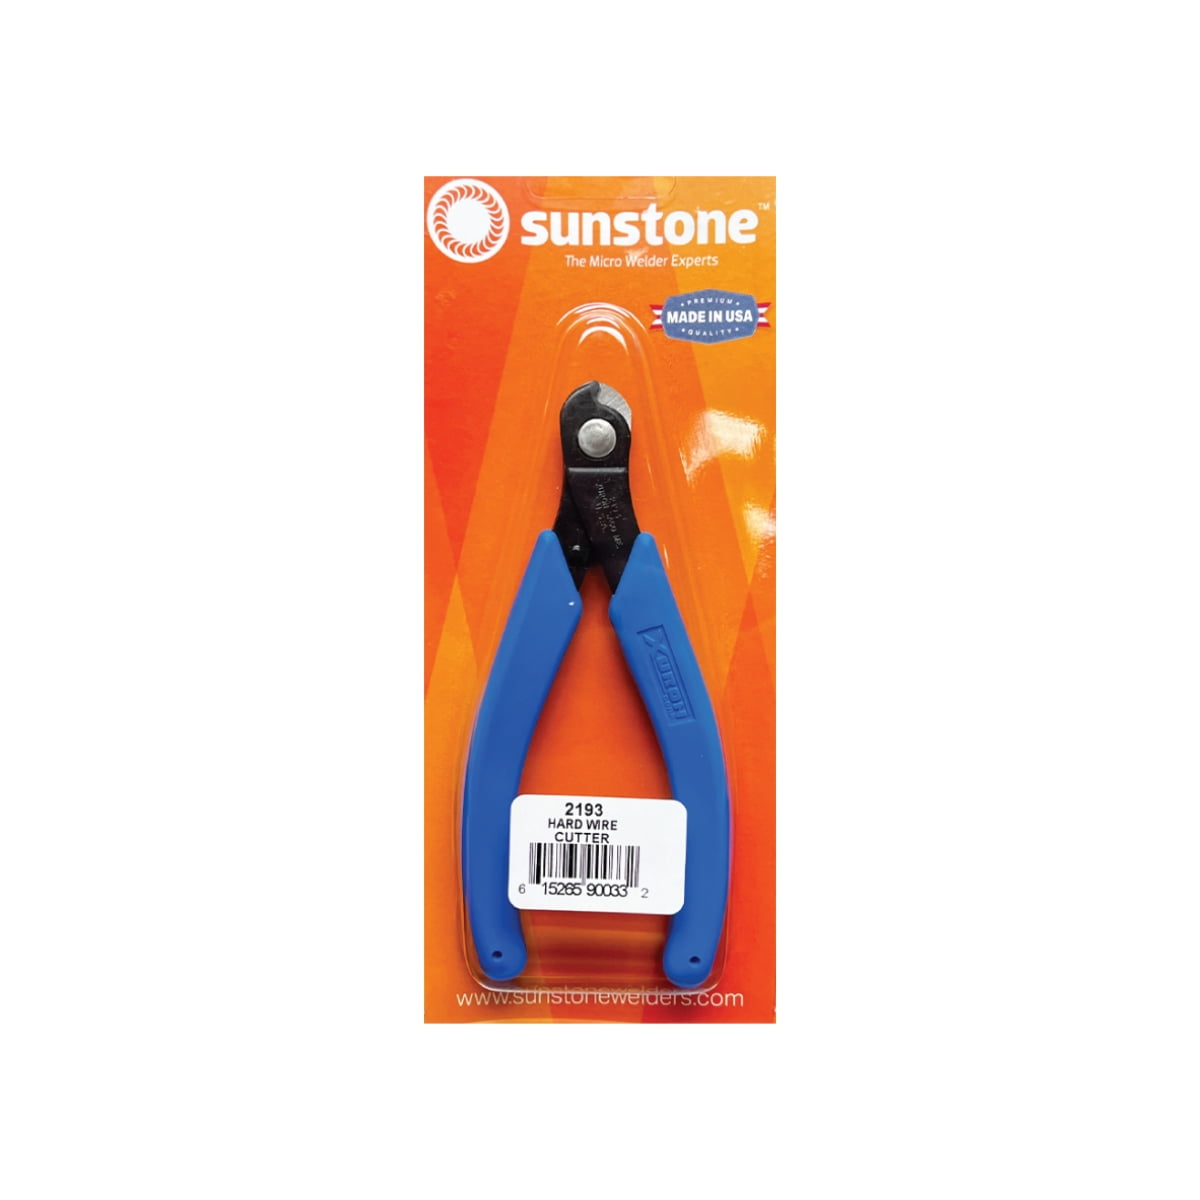 Sunstone Welding Tool Kit – forEVER Permanent Jewelry Supplies